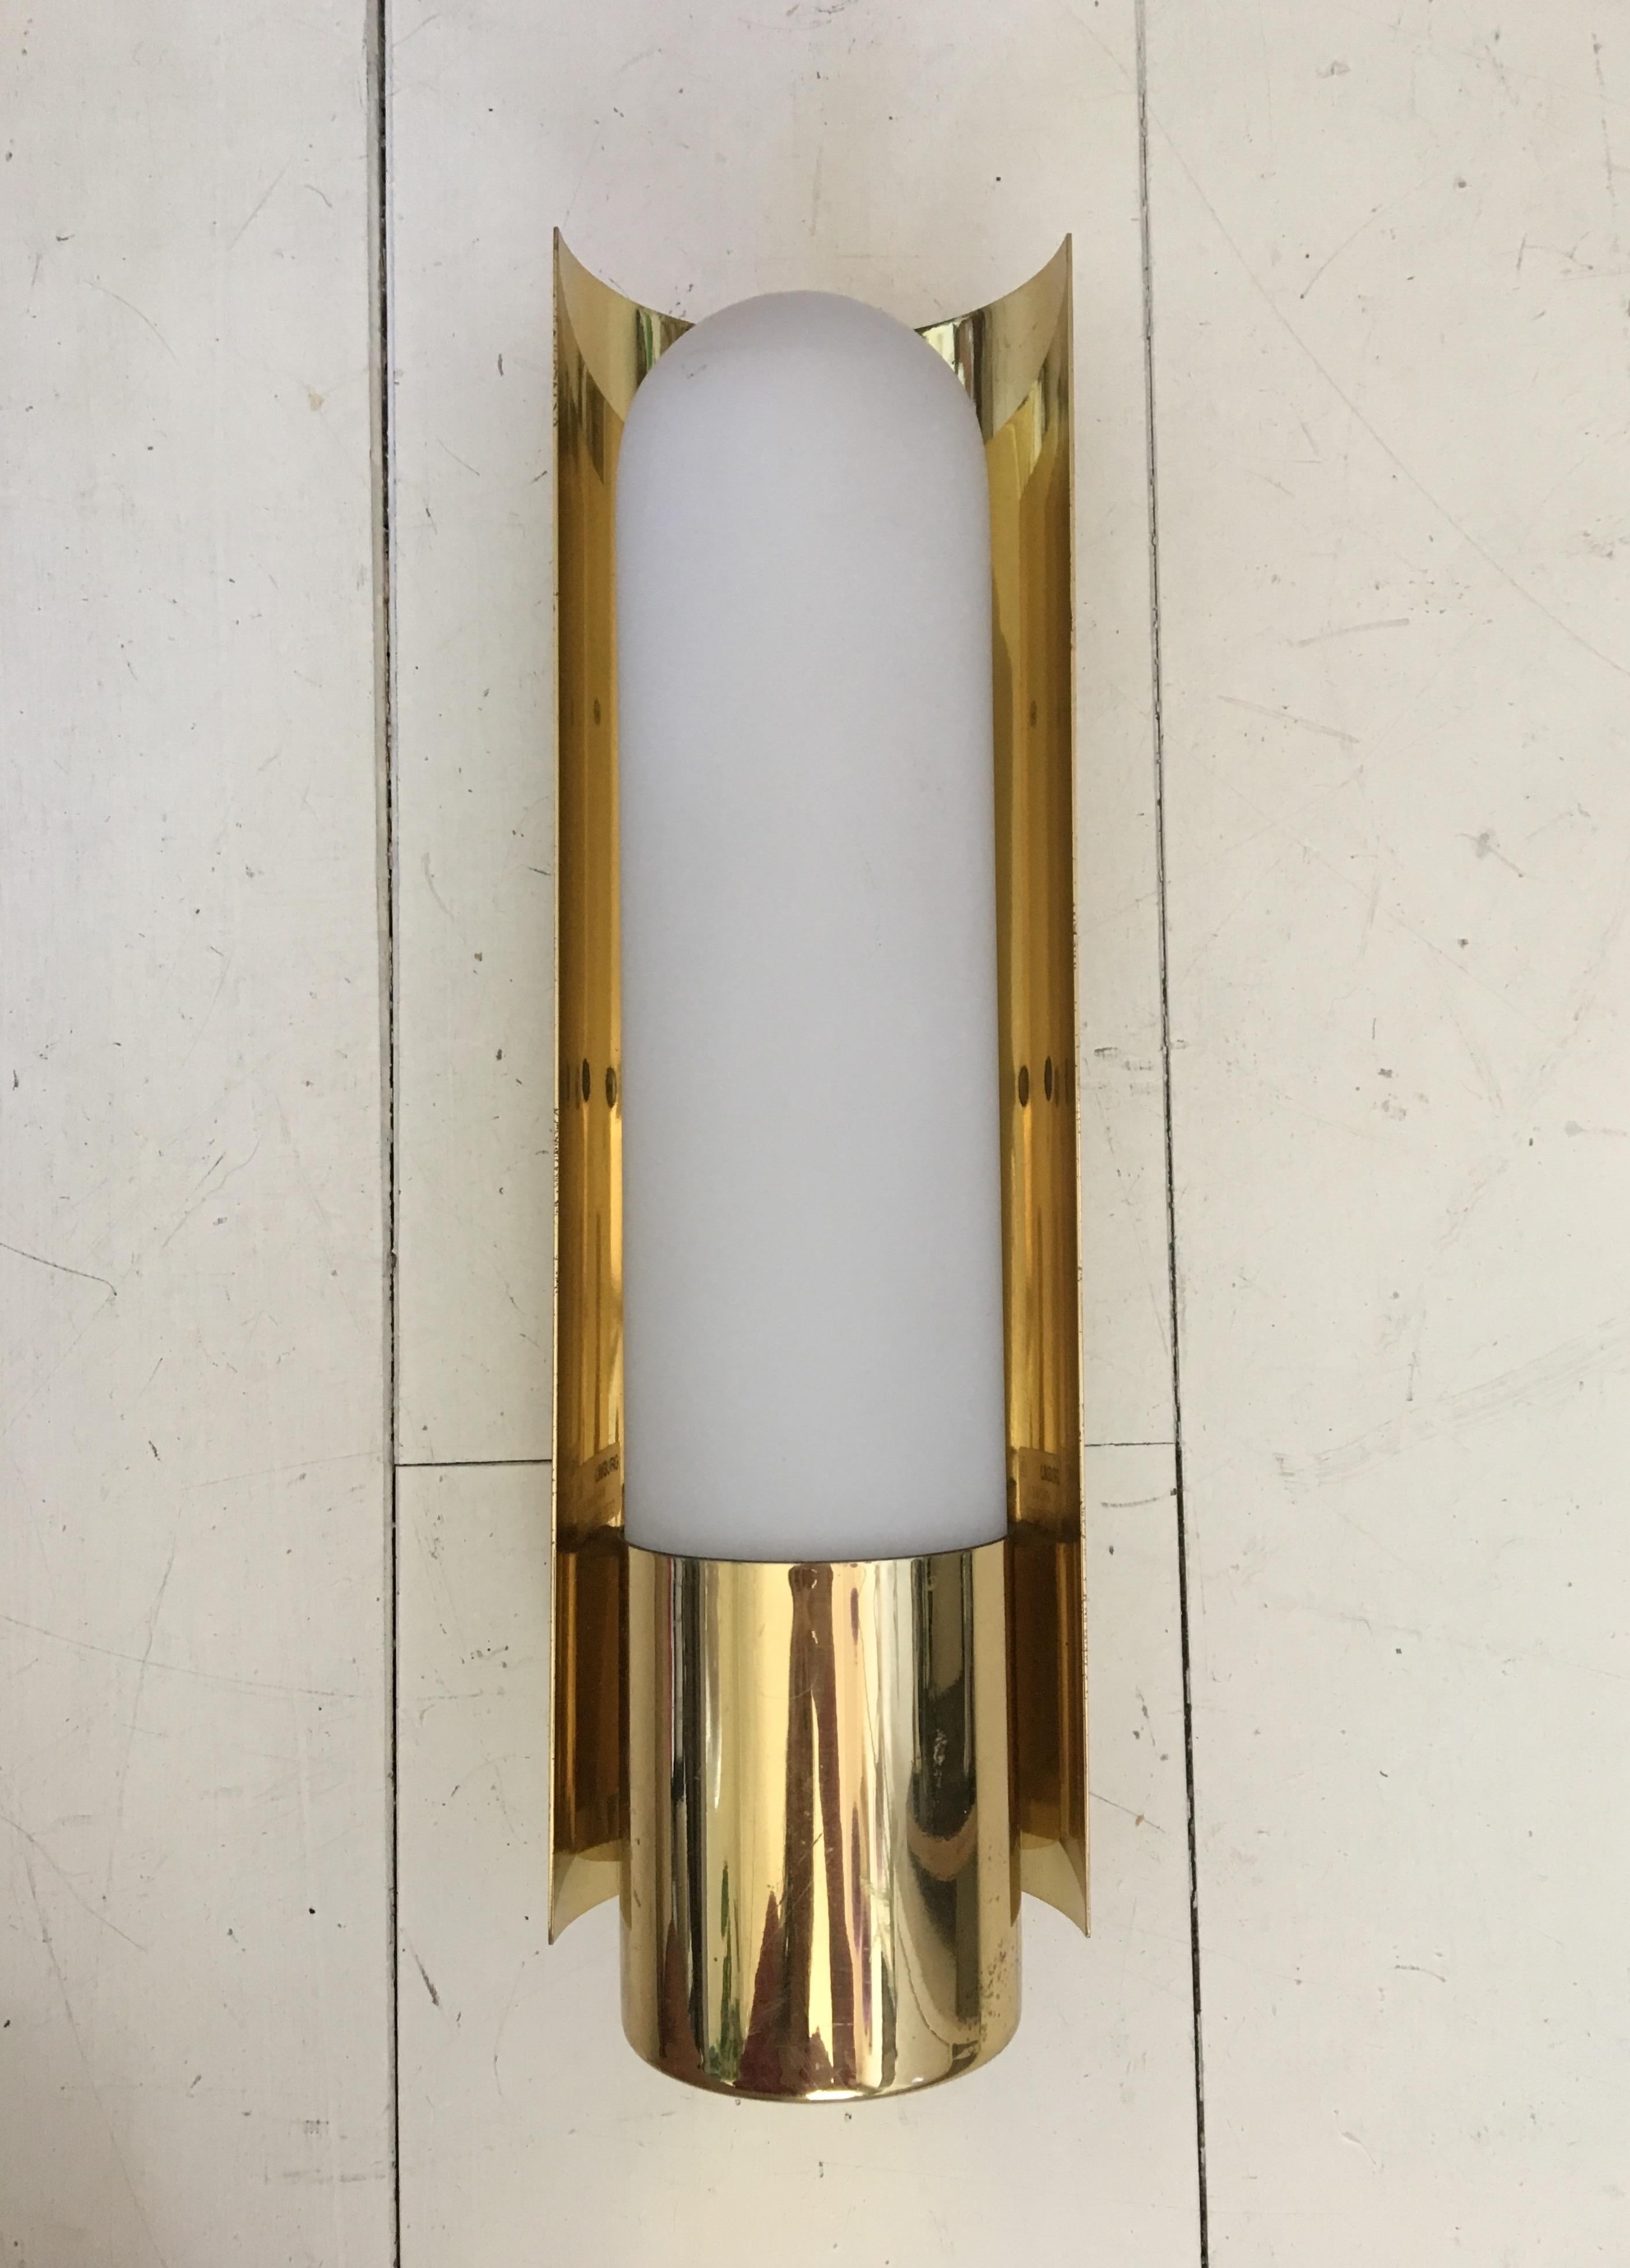 Wonderful brass and opaline glass wall light, which remains in very good condition. The piece is marked with the manufacturer's sticker. NOW TEMPORARY DISCOUNT PROMO CODE AVAILABLE, SEND MESSAGE FOR MORE INFORMATION!